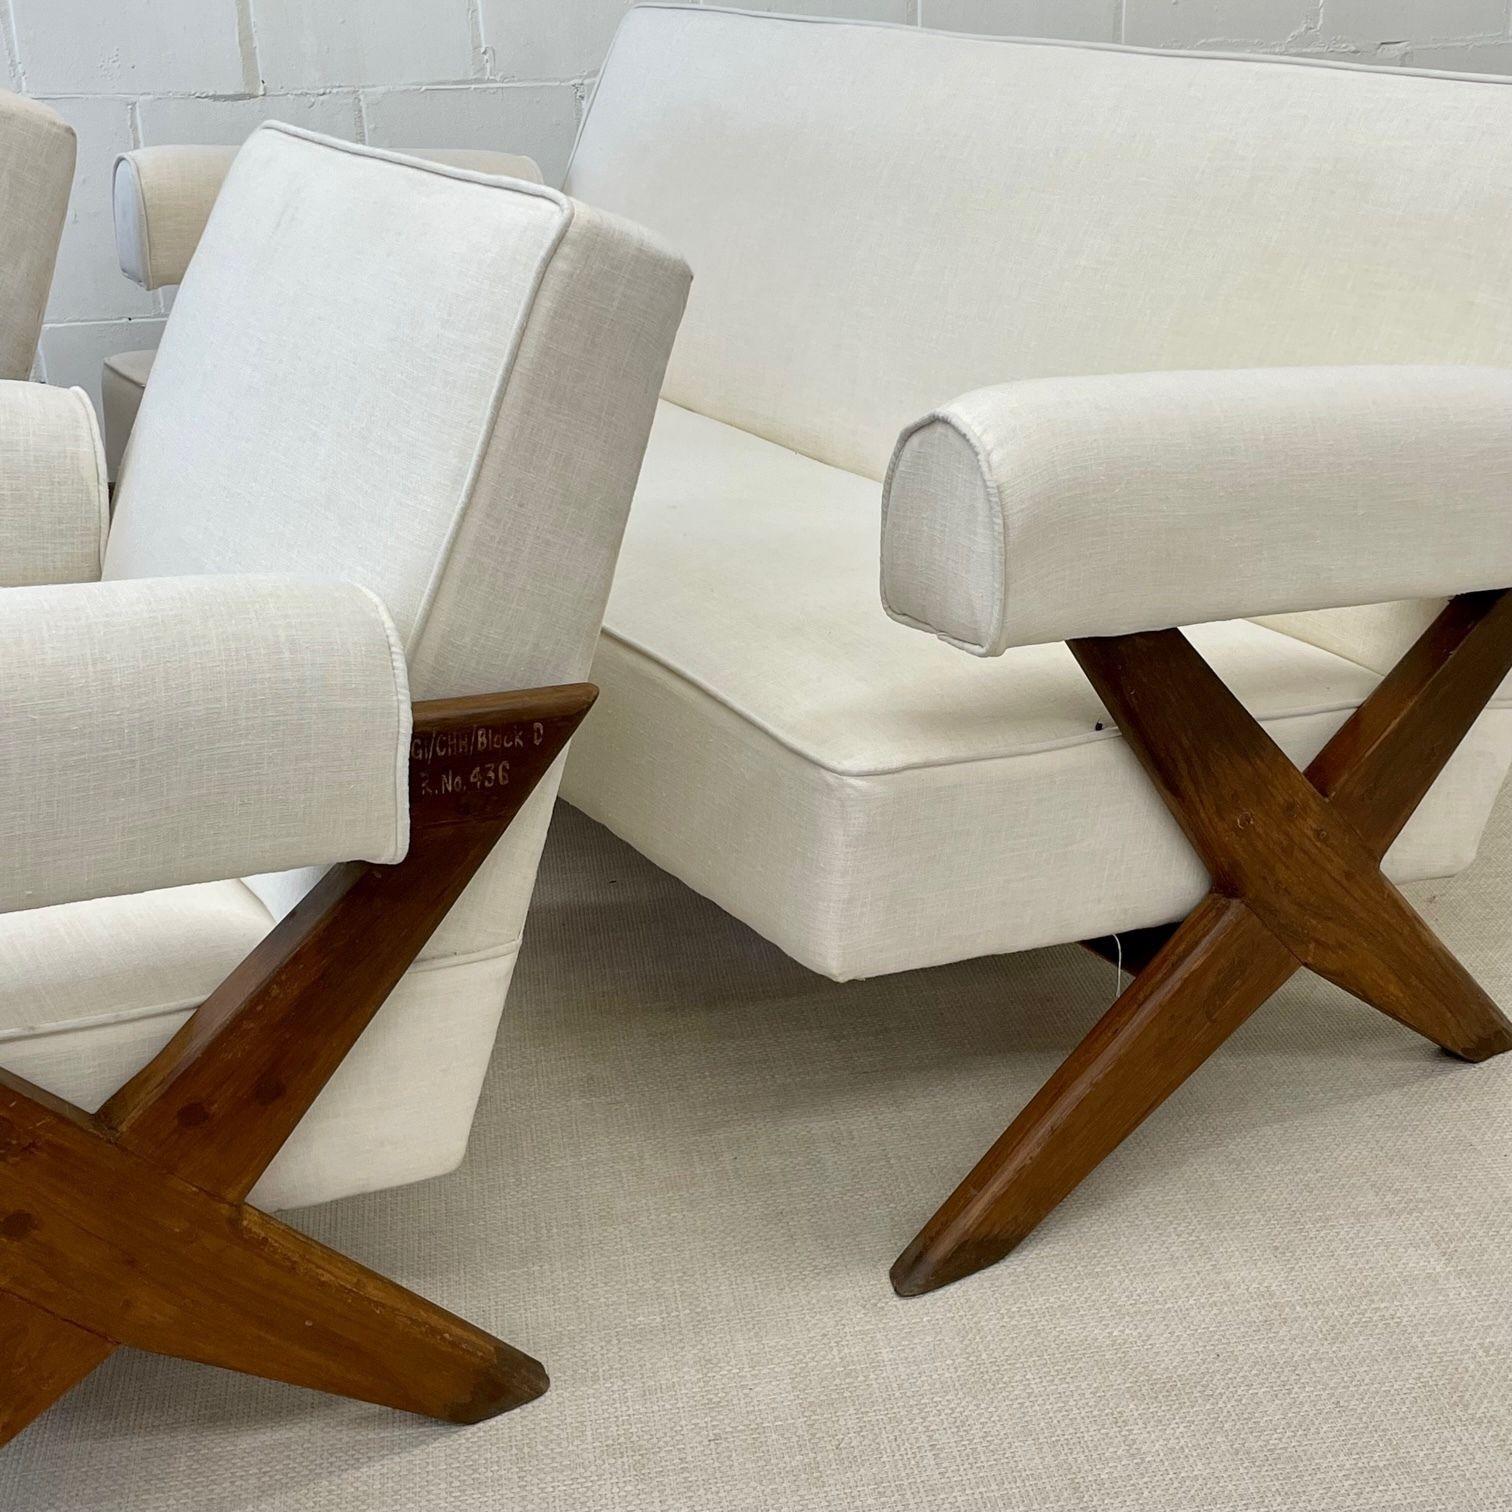 Pierre Jeanneret, French Mid-Century Modern, Upholstered Sofa Set, X-Leg, White Linen, India, 1960s
 
Rare sofa set comprised of slightly tilted backrest, seat, and armrests sitting on a double x-leg assembly base.
  
France, India, c. 1960s
 
Each